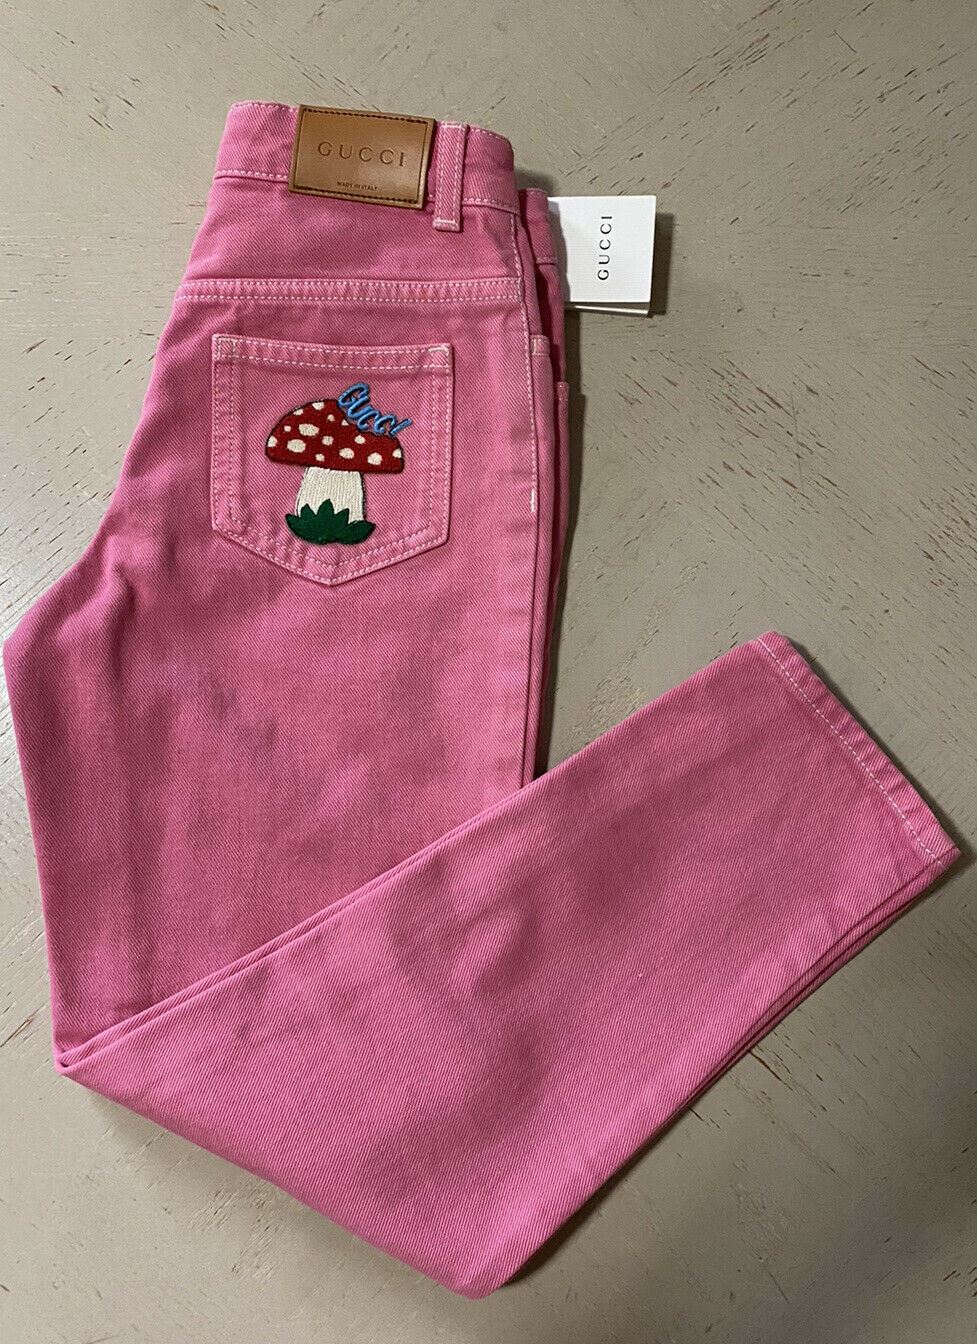 NWT Gucci Girls Jeans Pants Pink Size 10 Italy